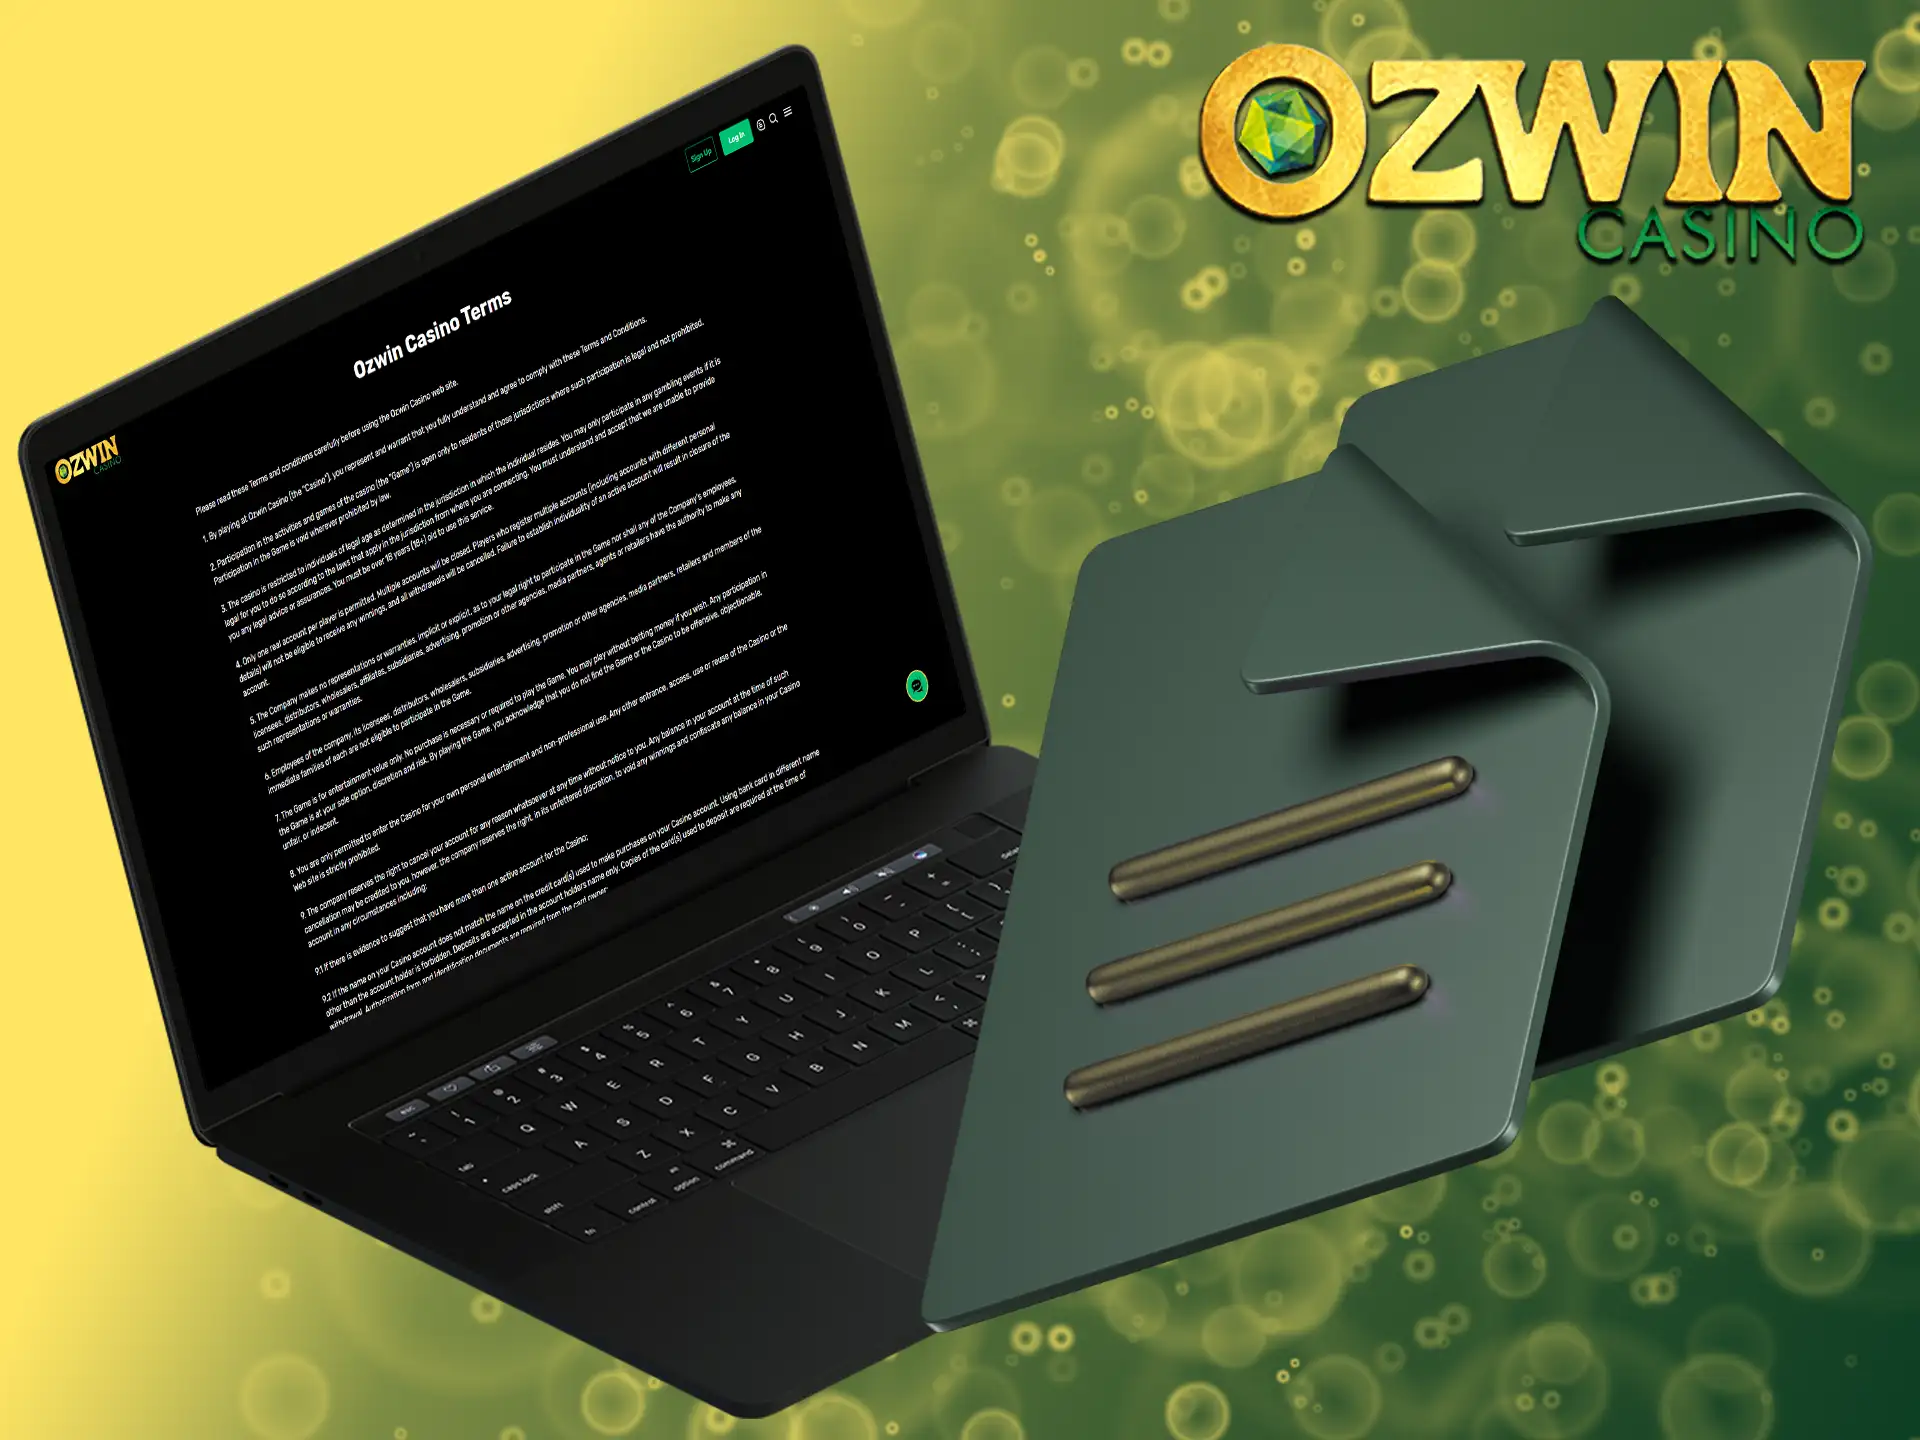 For complete details on withdrawing funds, check Ozwin Casino's terms and conditions.